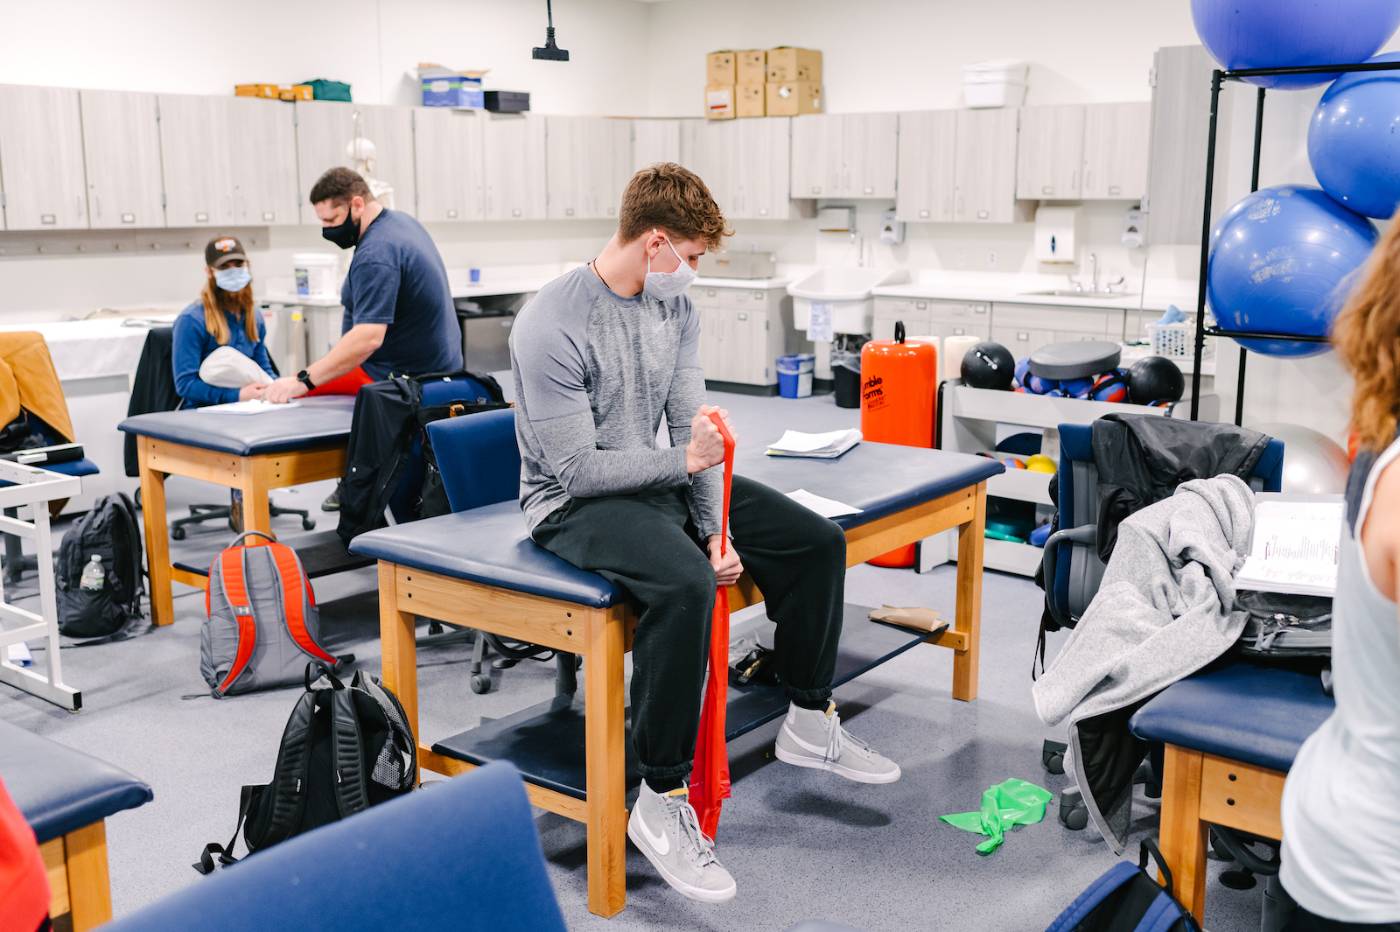 Student practicing with exercise band in lab